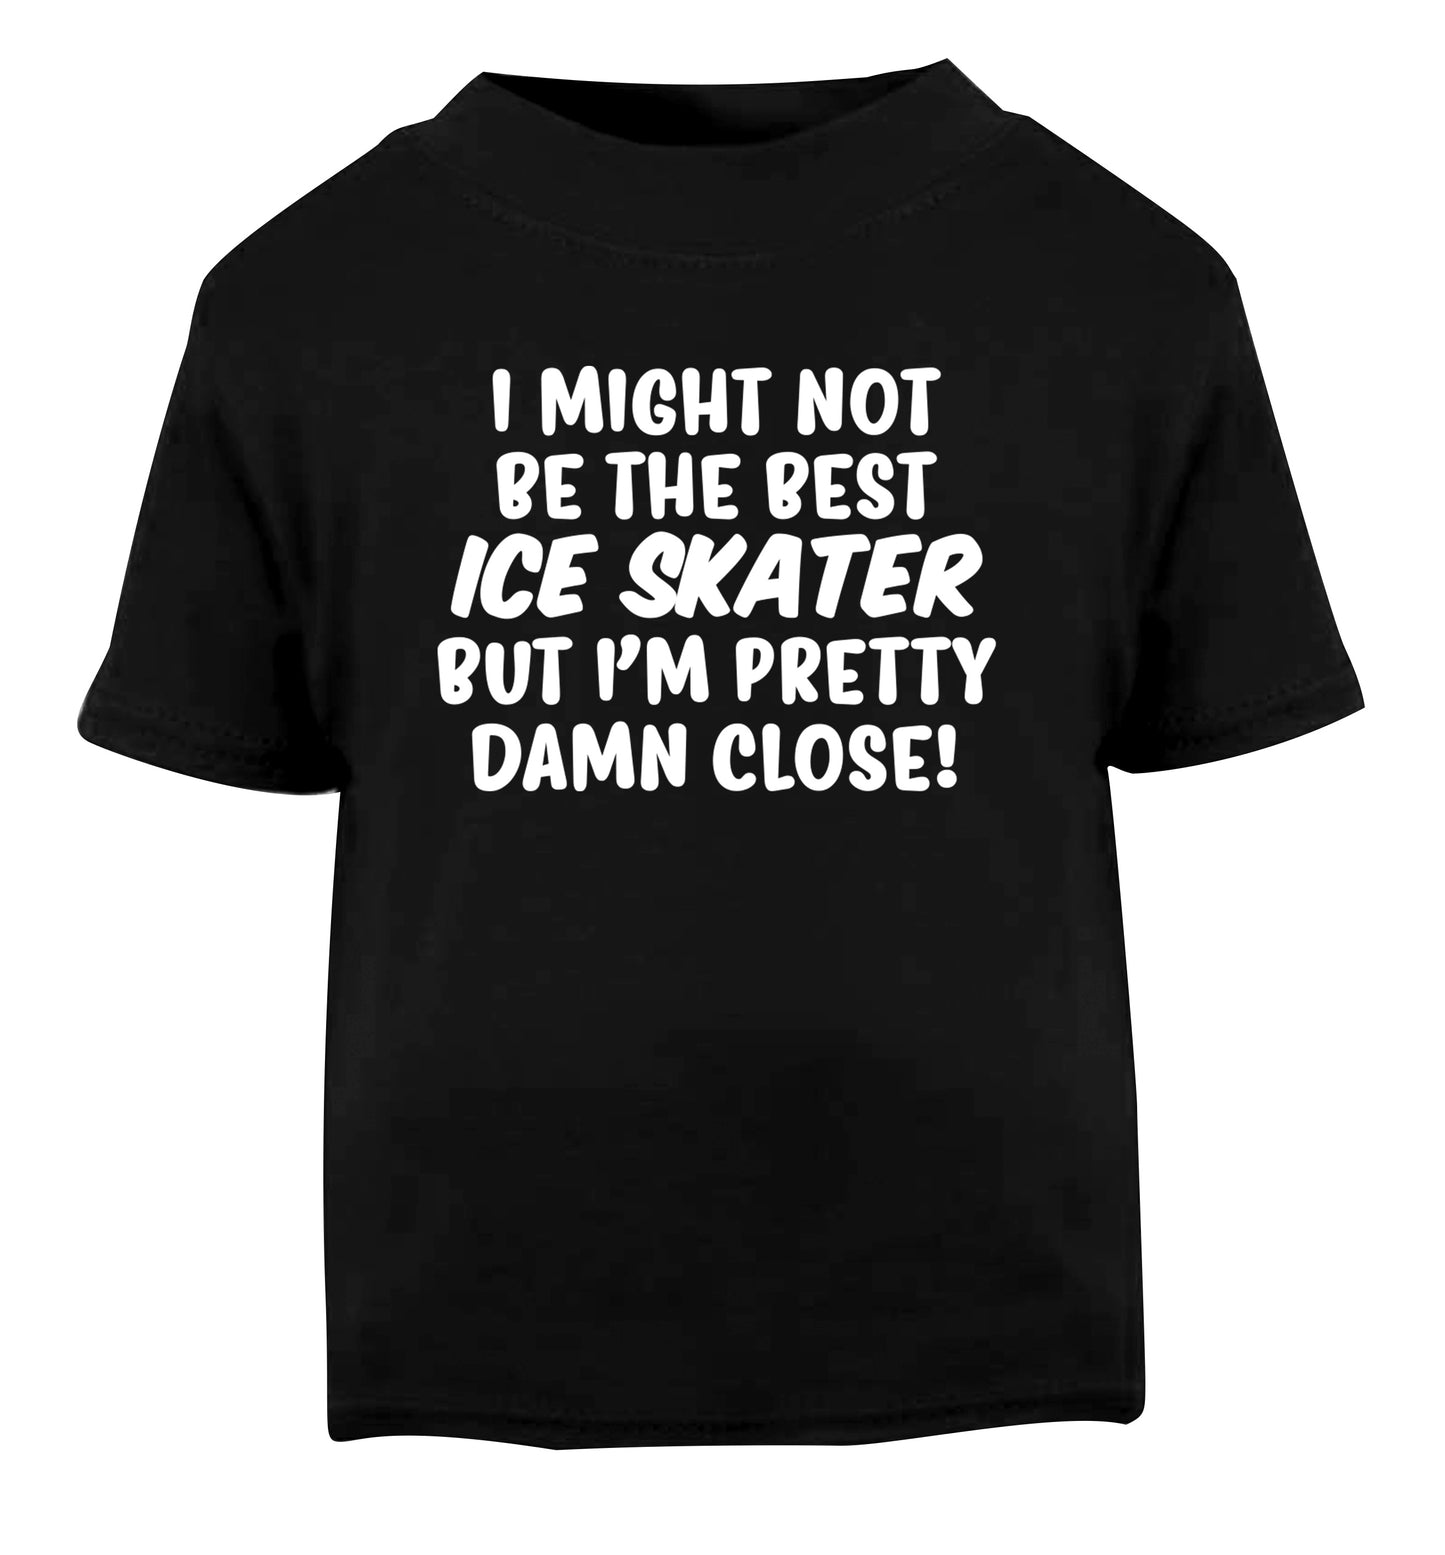 I might not be the best ice skater but I'm pretty damn close! Black Baby Toddler Tshirt 2 years